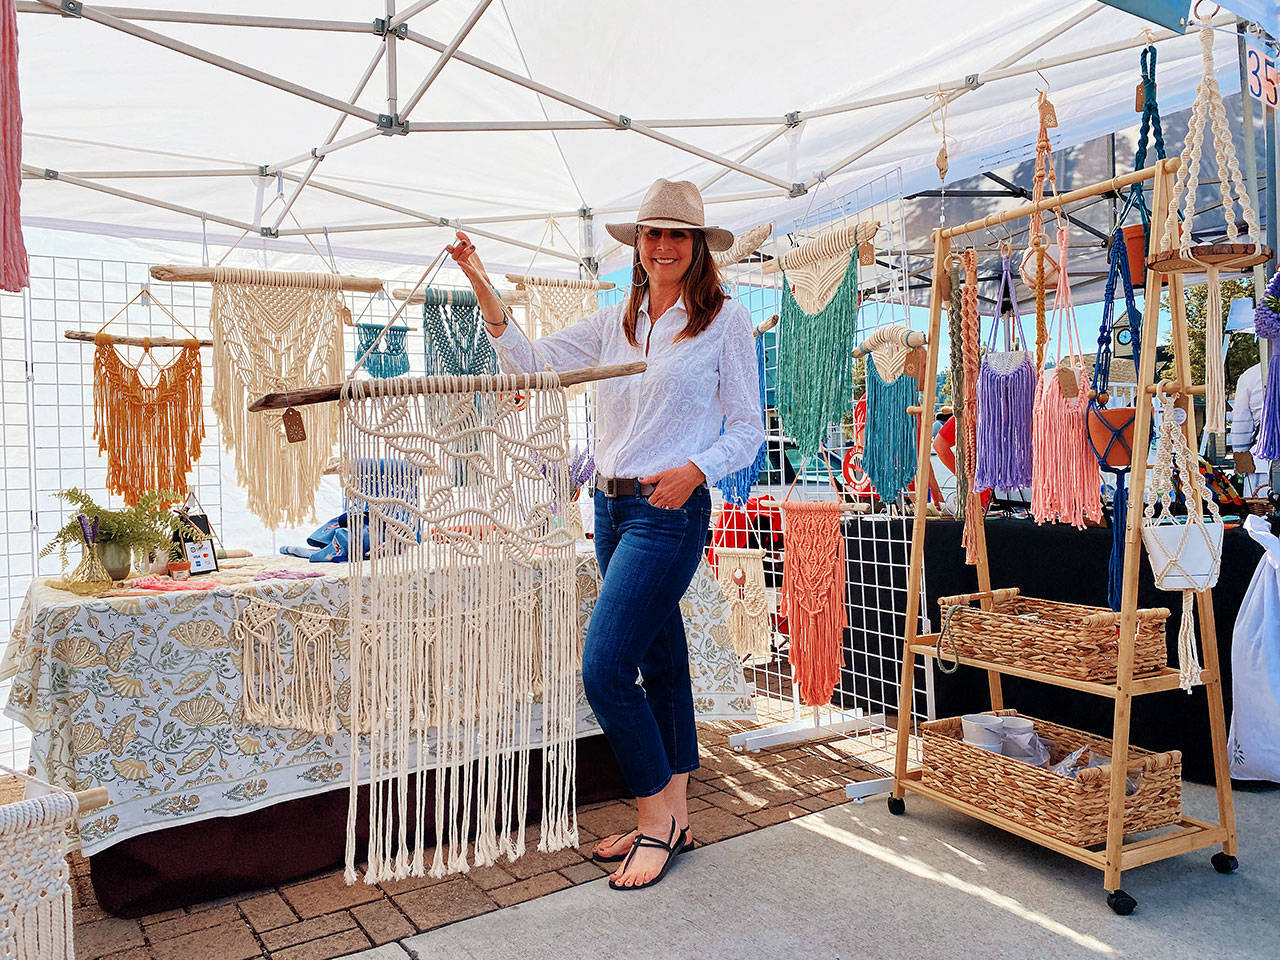 Shelly Weber of PNW GIRL brings her wall hangings, hand-woven plant holders and other wall art to the Sequim Farmers & Artisans Market each Saturday. Photo by Emma Jane “EJ” Garcia